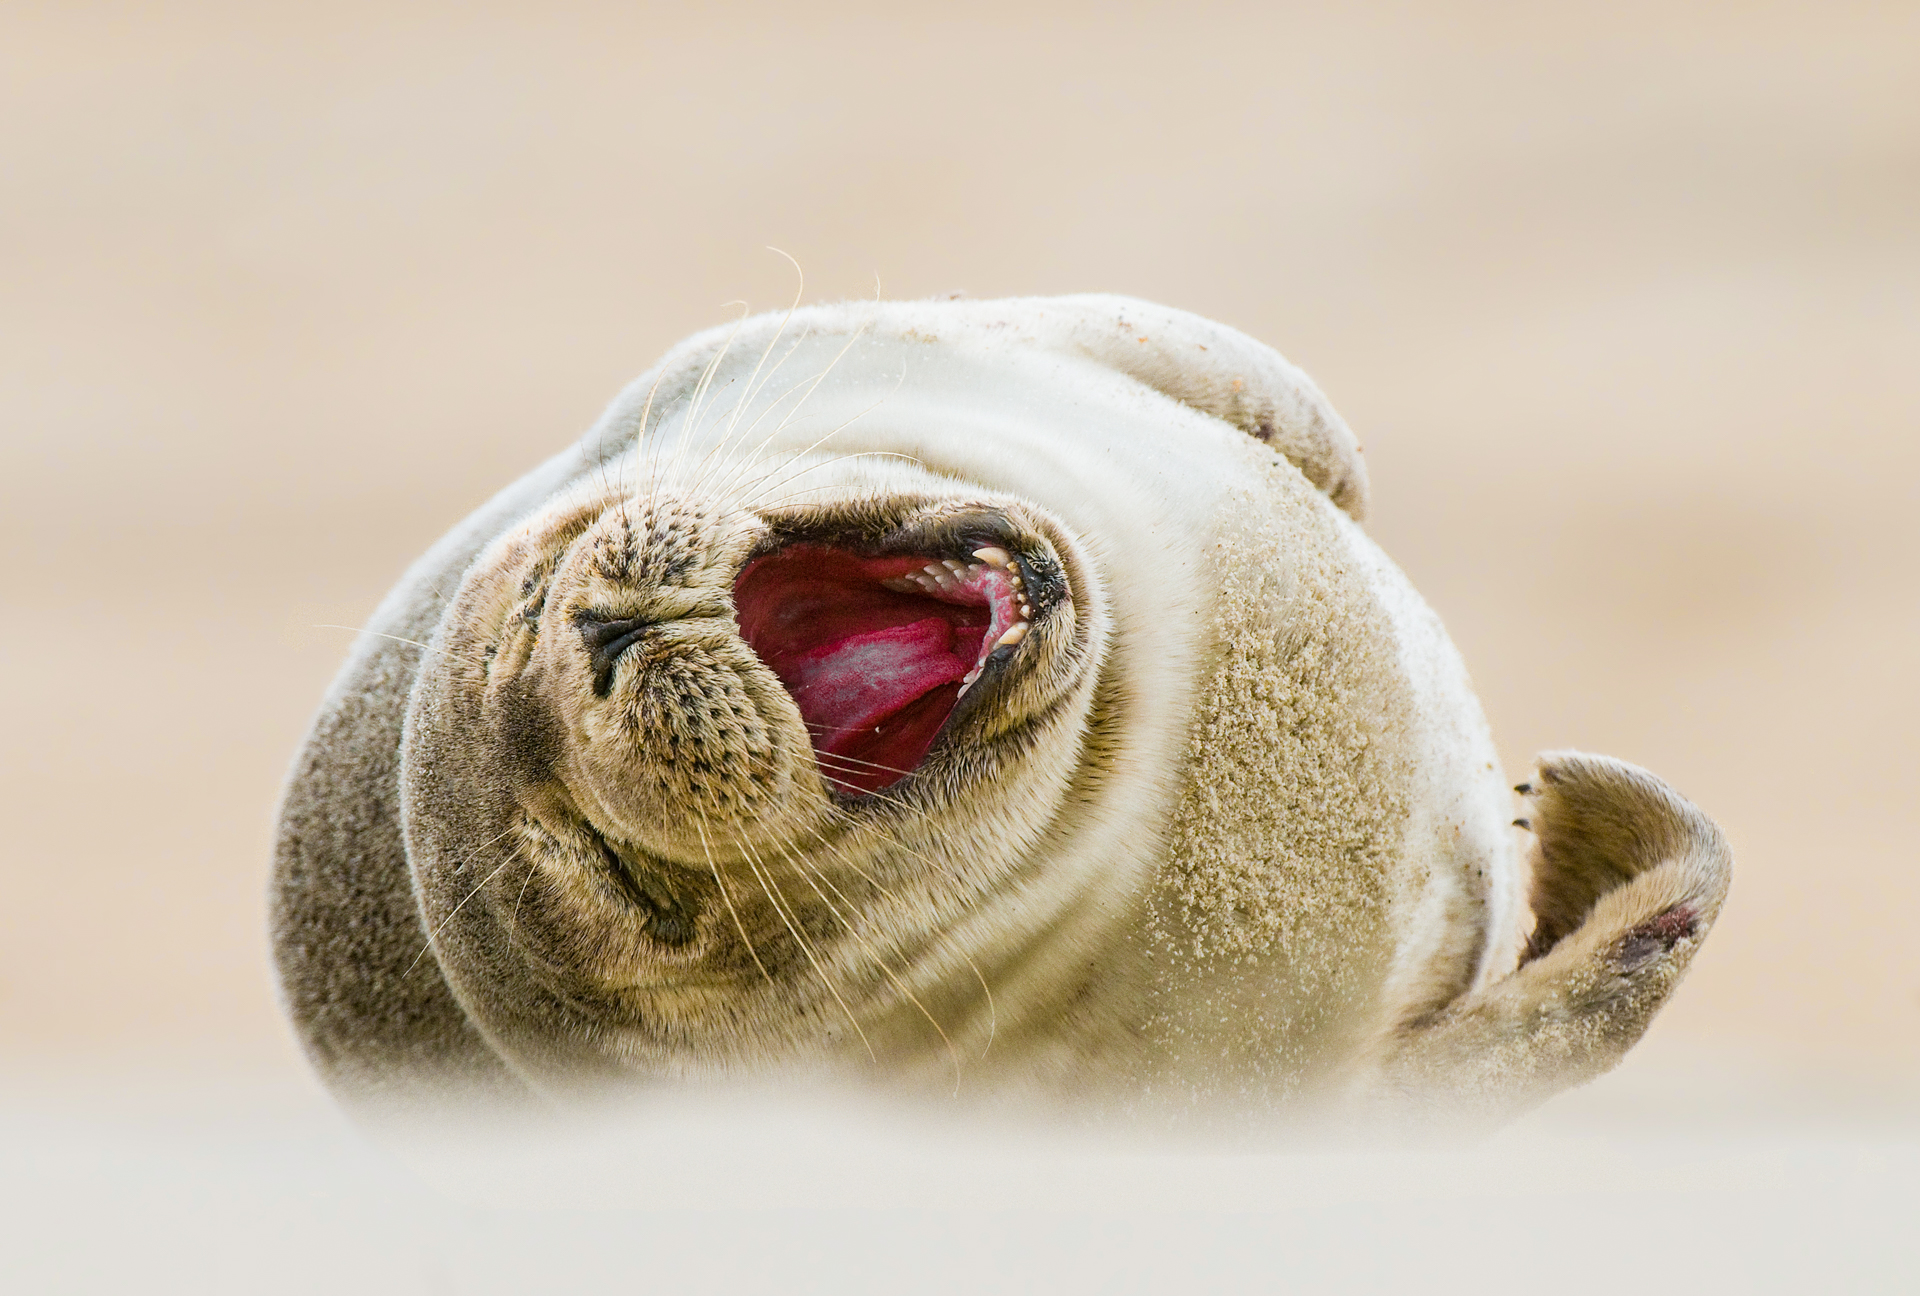 A harbor seal pup in Duck. Harbor seals are one of several seal species turning up along the Outer Banks in recent years, according to Coastal Review Online.